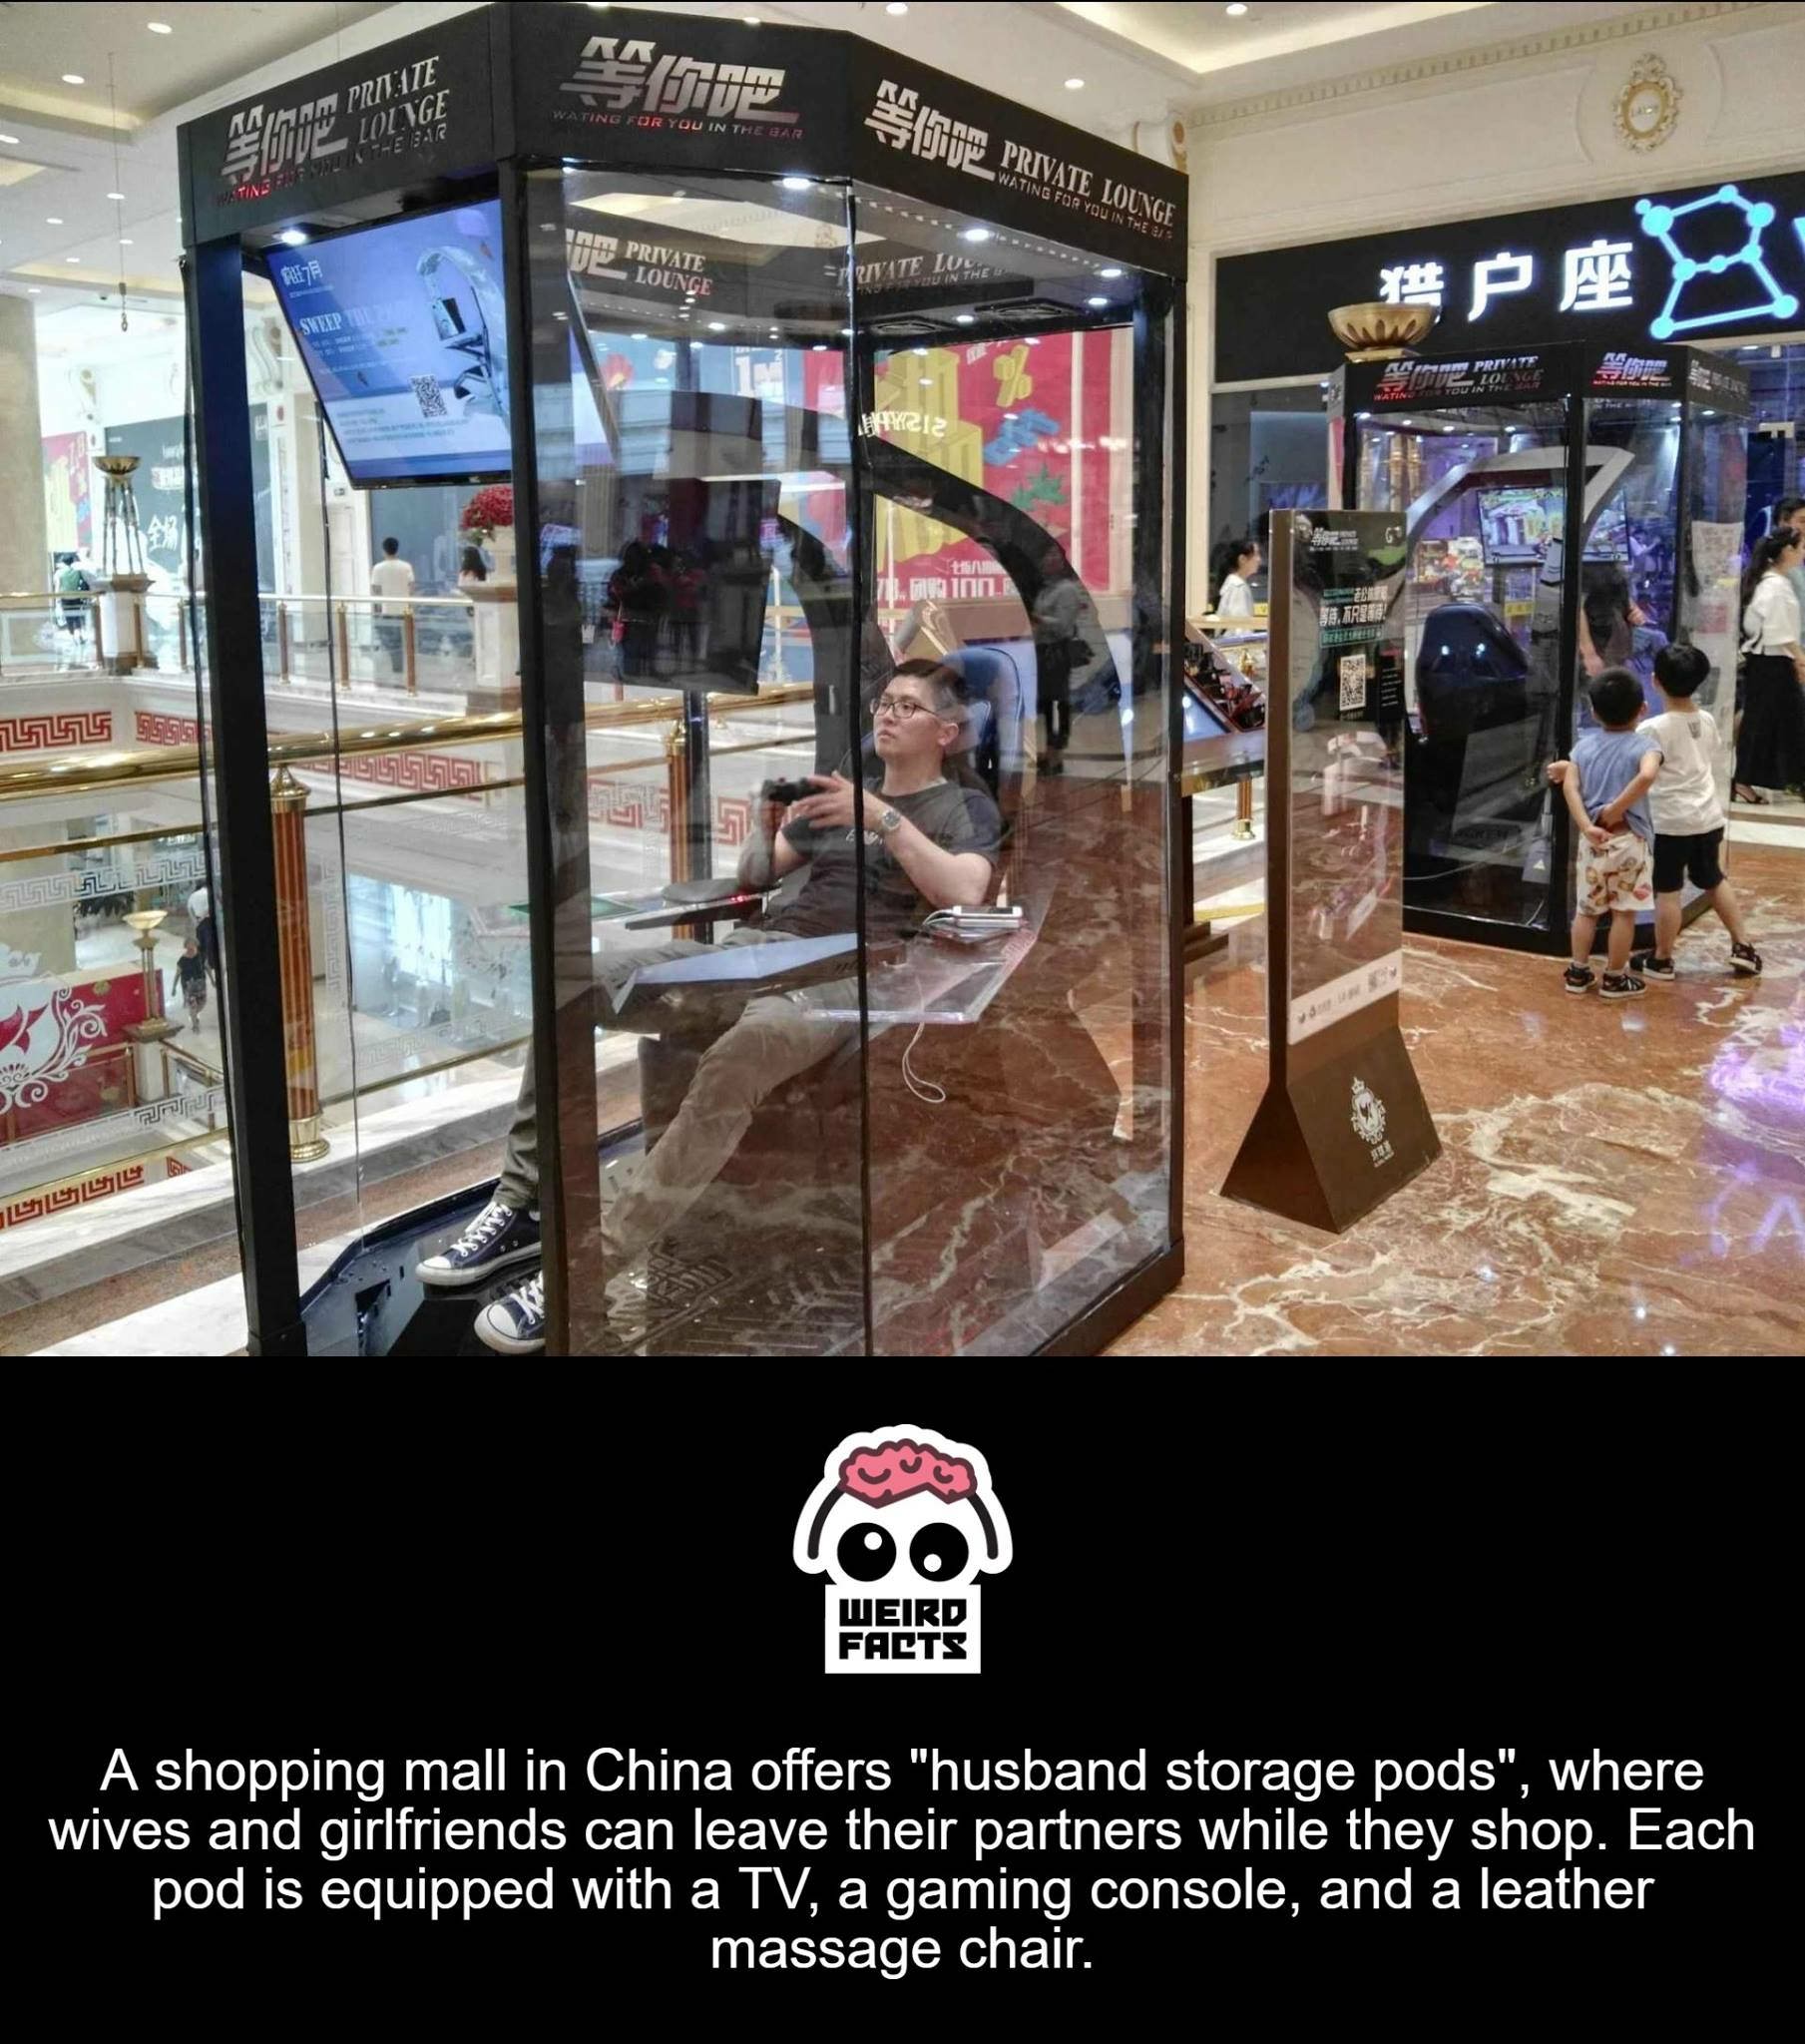 shopping malls funny - Adde Wating For You In The Bar 4470M Private L Ninge Thie Private Lou Wating For You In Thesis Itinera mm Private Lounge Strate Pa Sweep Prit I Lolage Whis 75 Inn Ooo Lella Weird Facts A shopping mall in China offers "husband storag